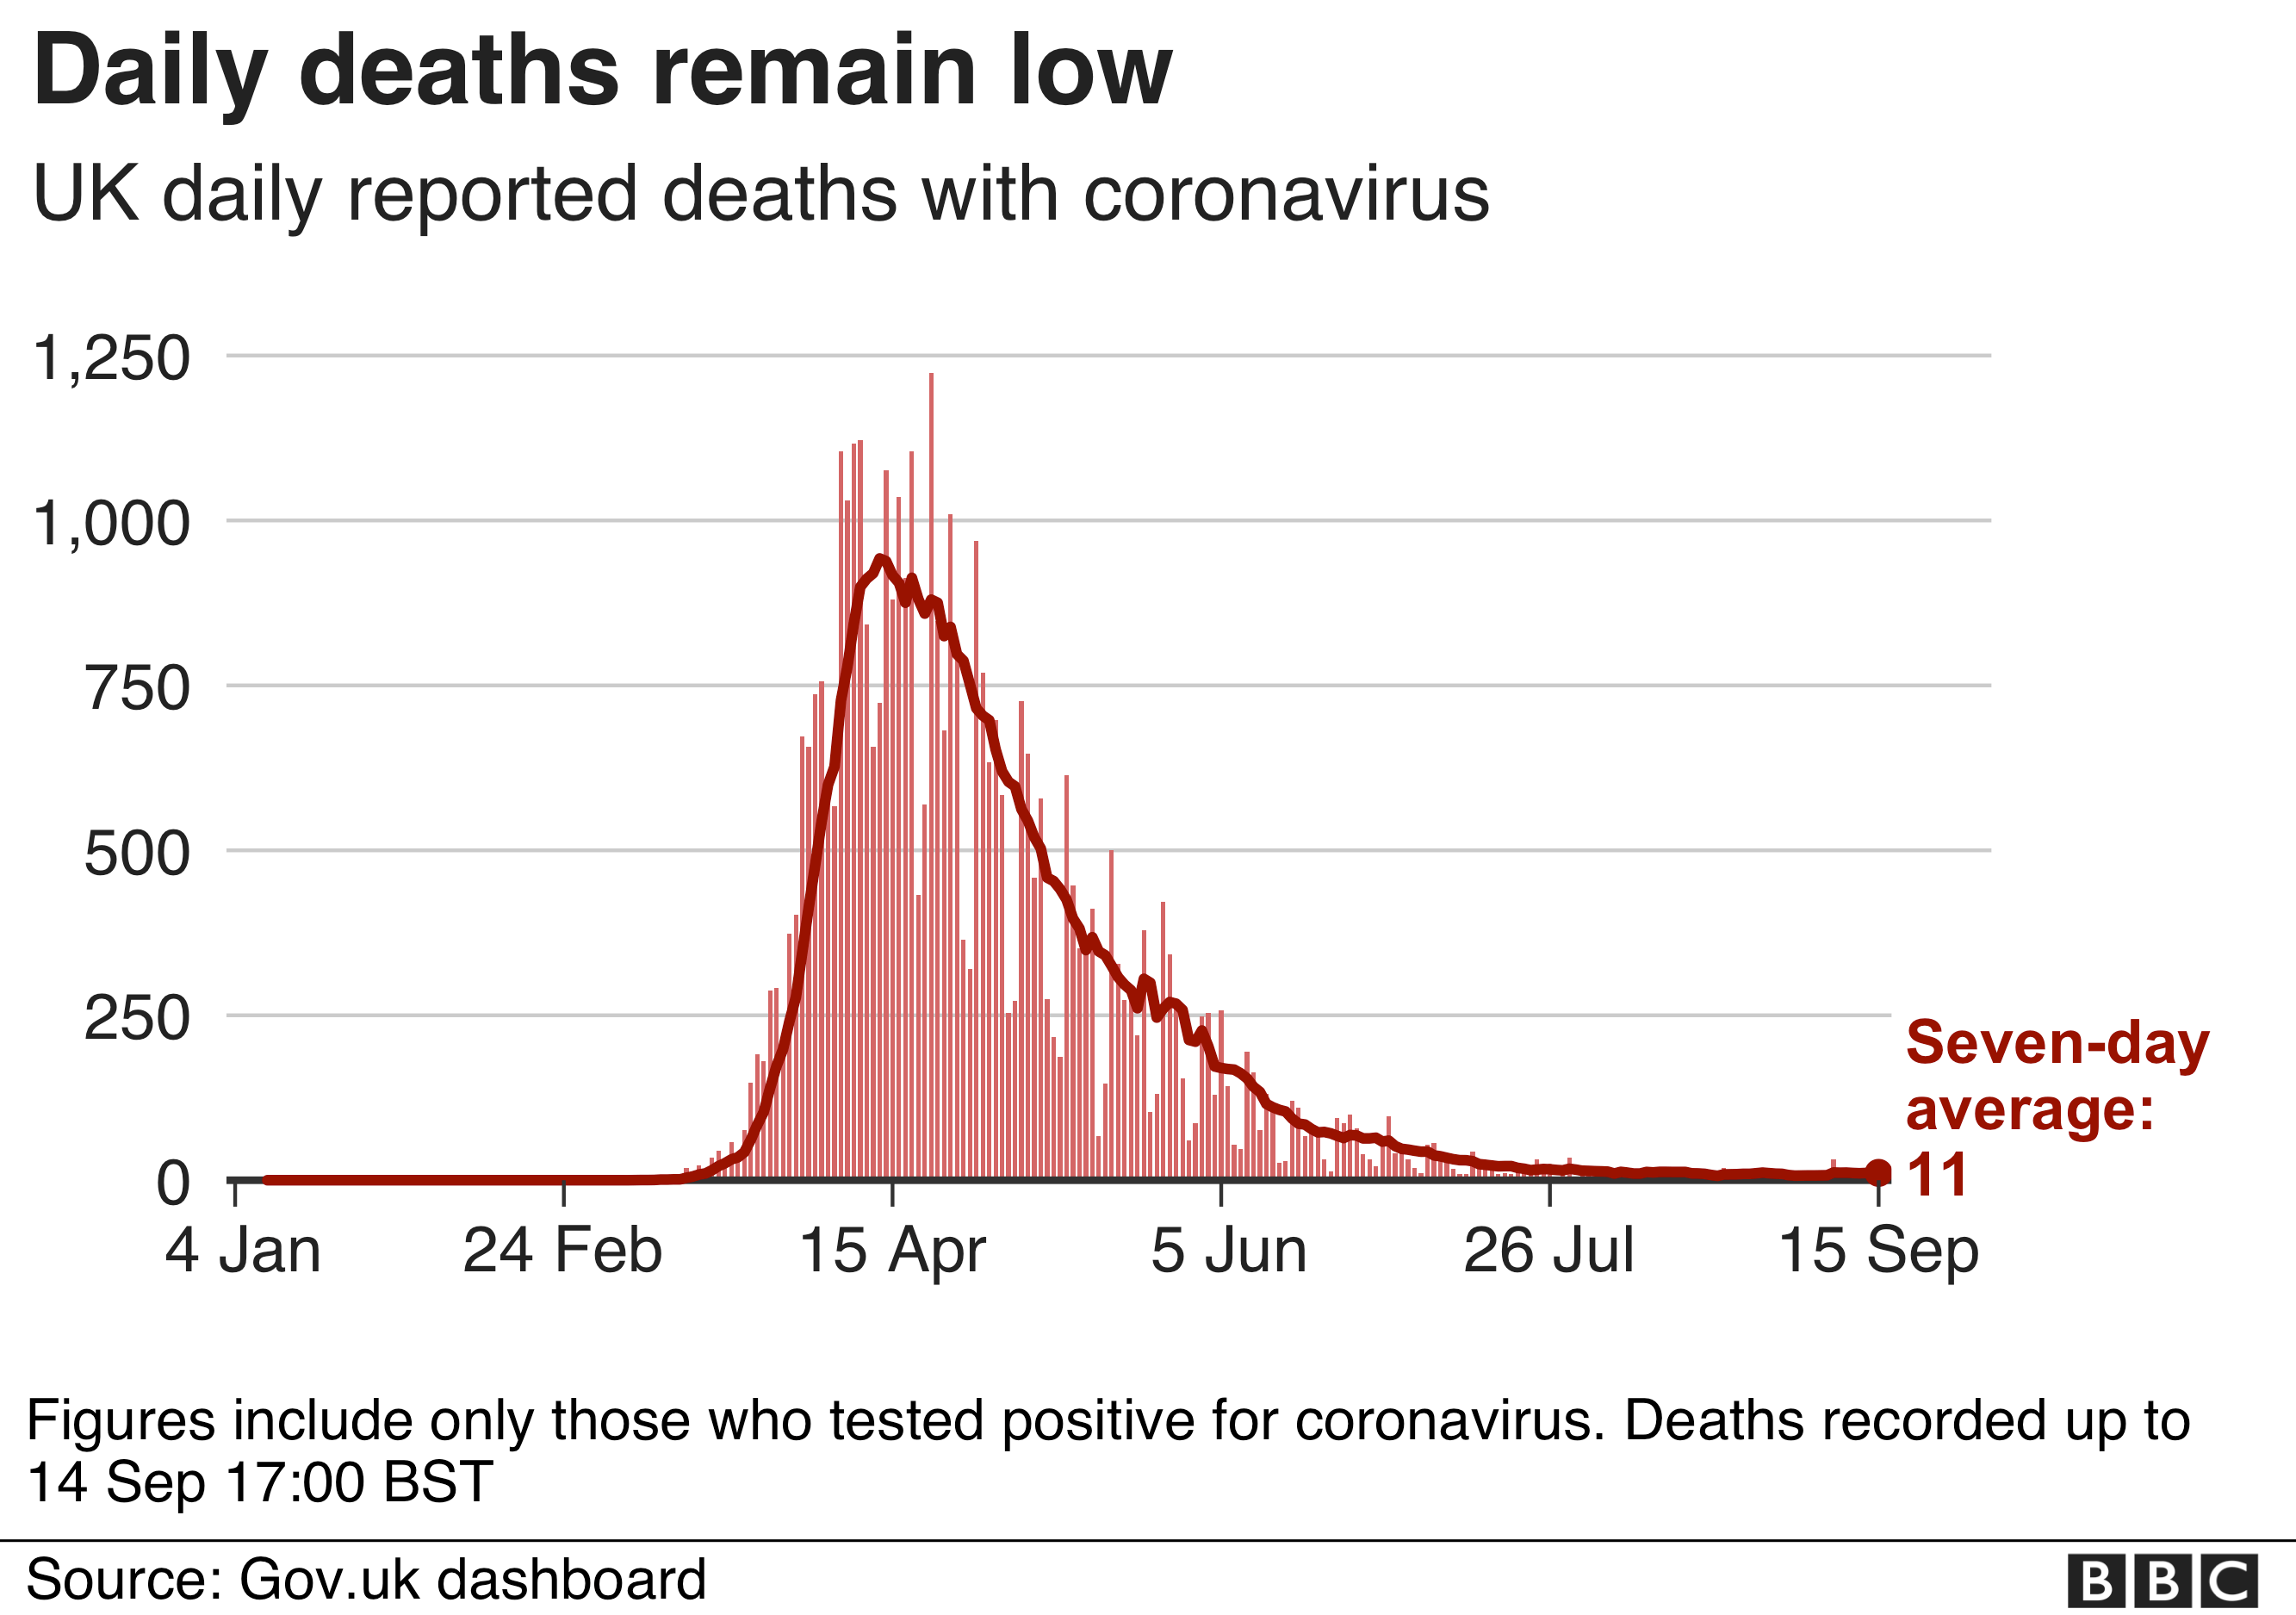 Chart showing UK daily deaths remain low